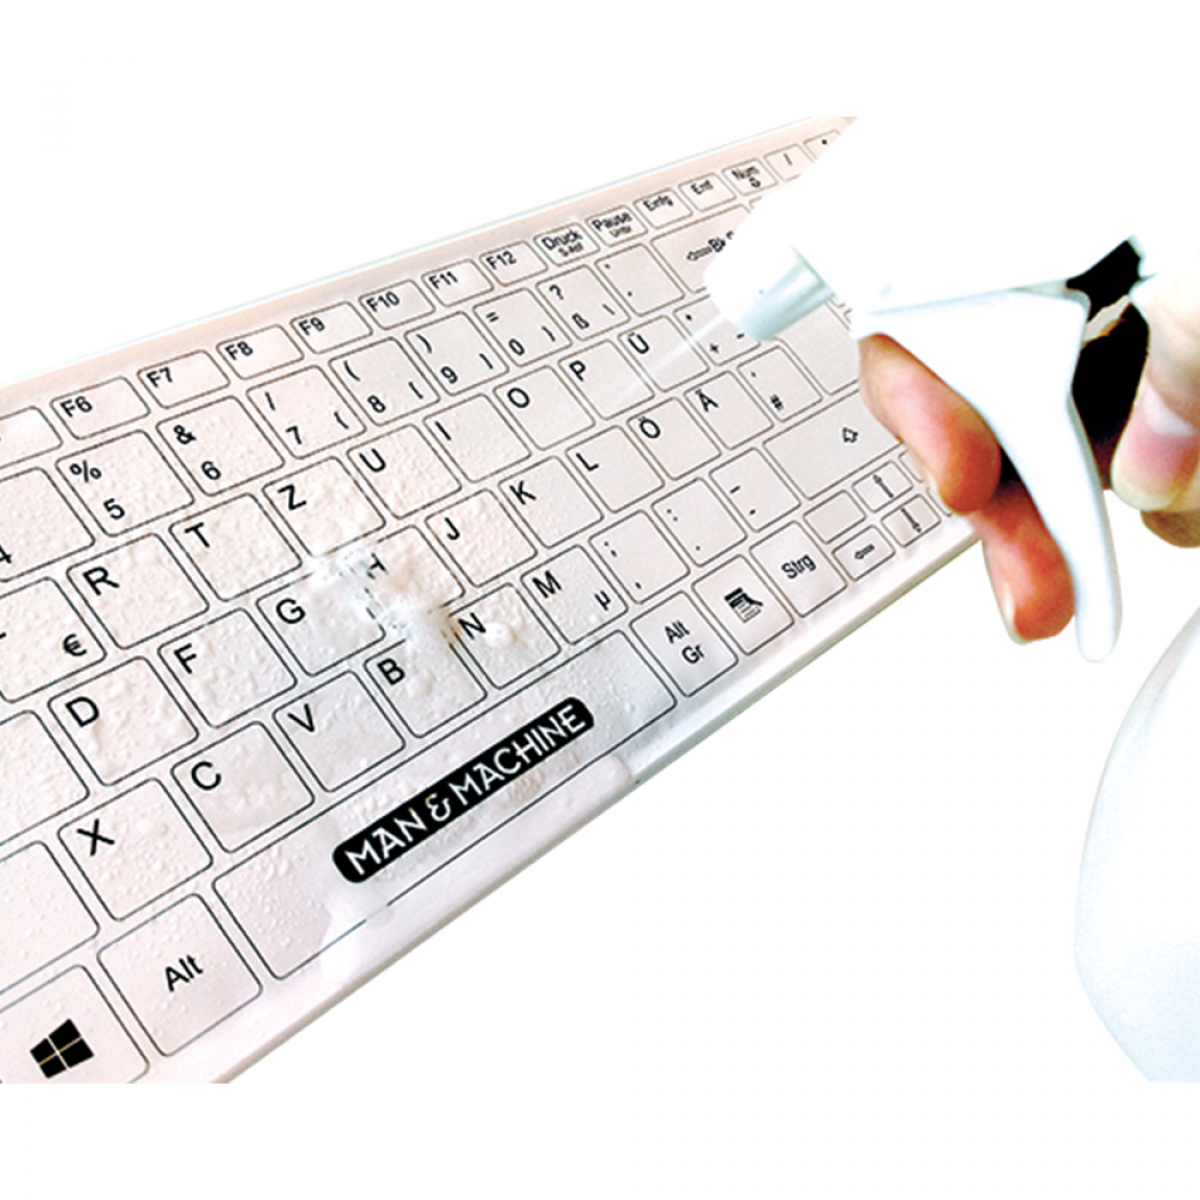 Disinfectable keyboard for hospitals - Man & Machine - Its Cool Flat Keyboard